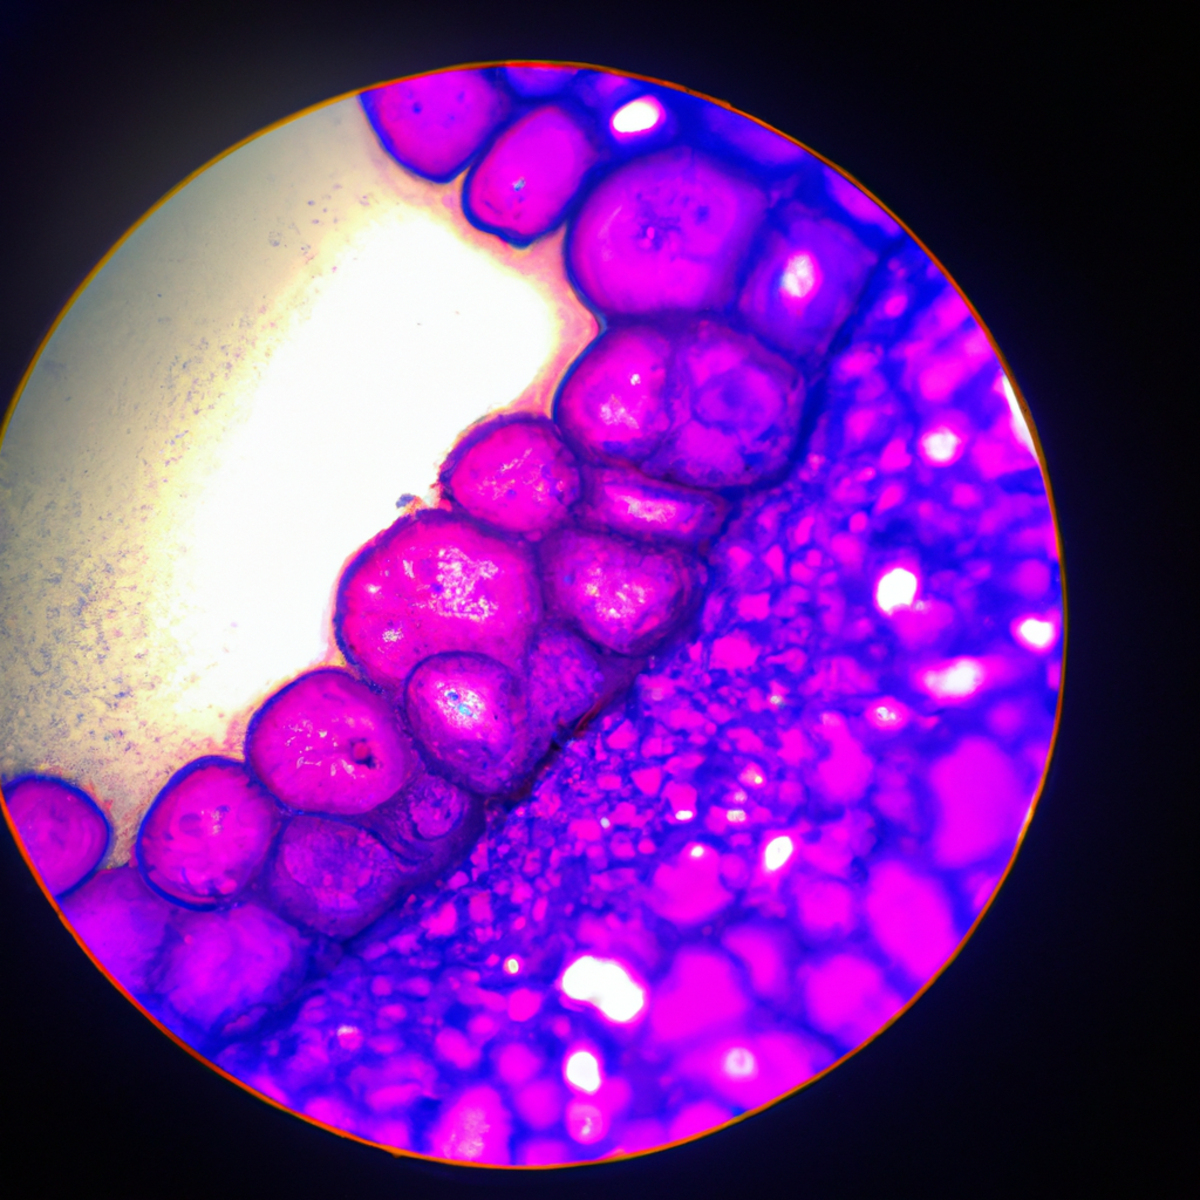 Close-up view of Gastrointestinal stromal tumor (GIST) tissue sample under microscope, revealing vibrant colors and irregular cell shapes.